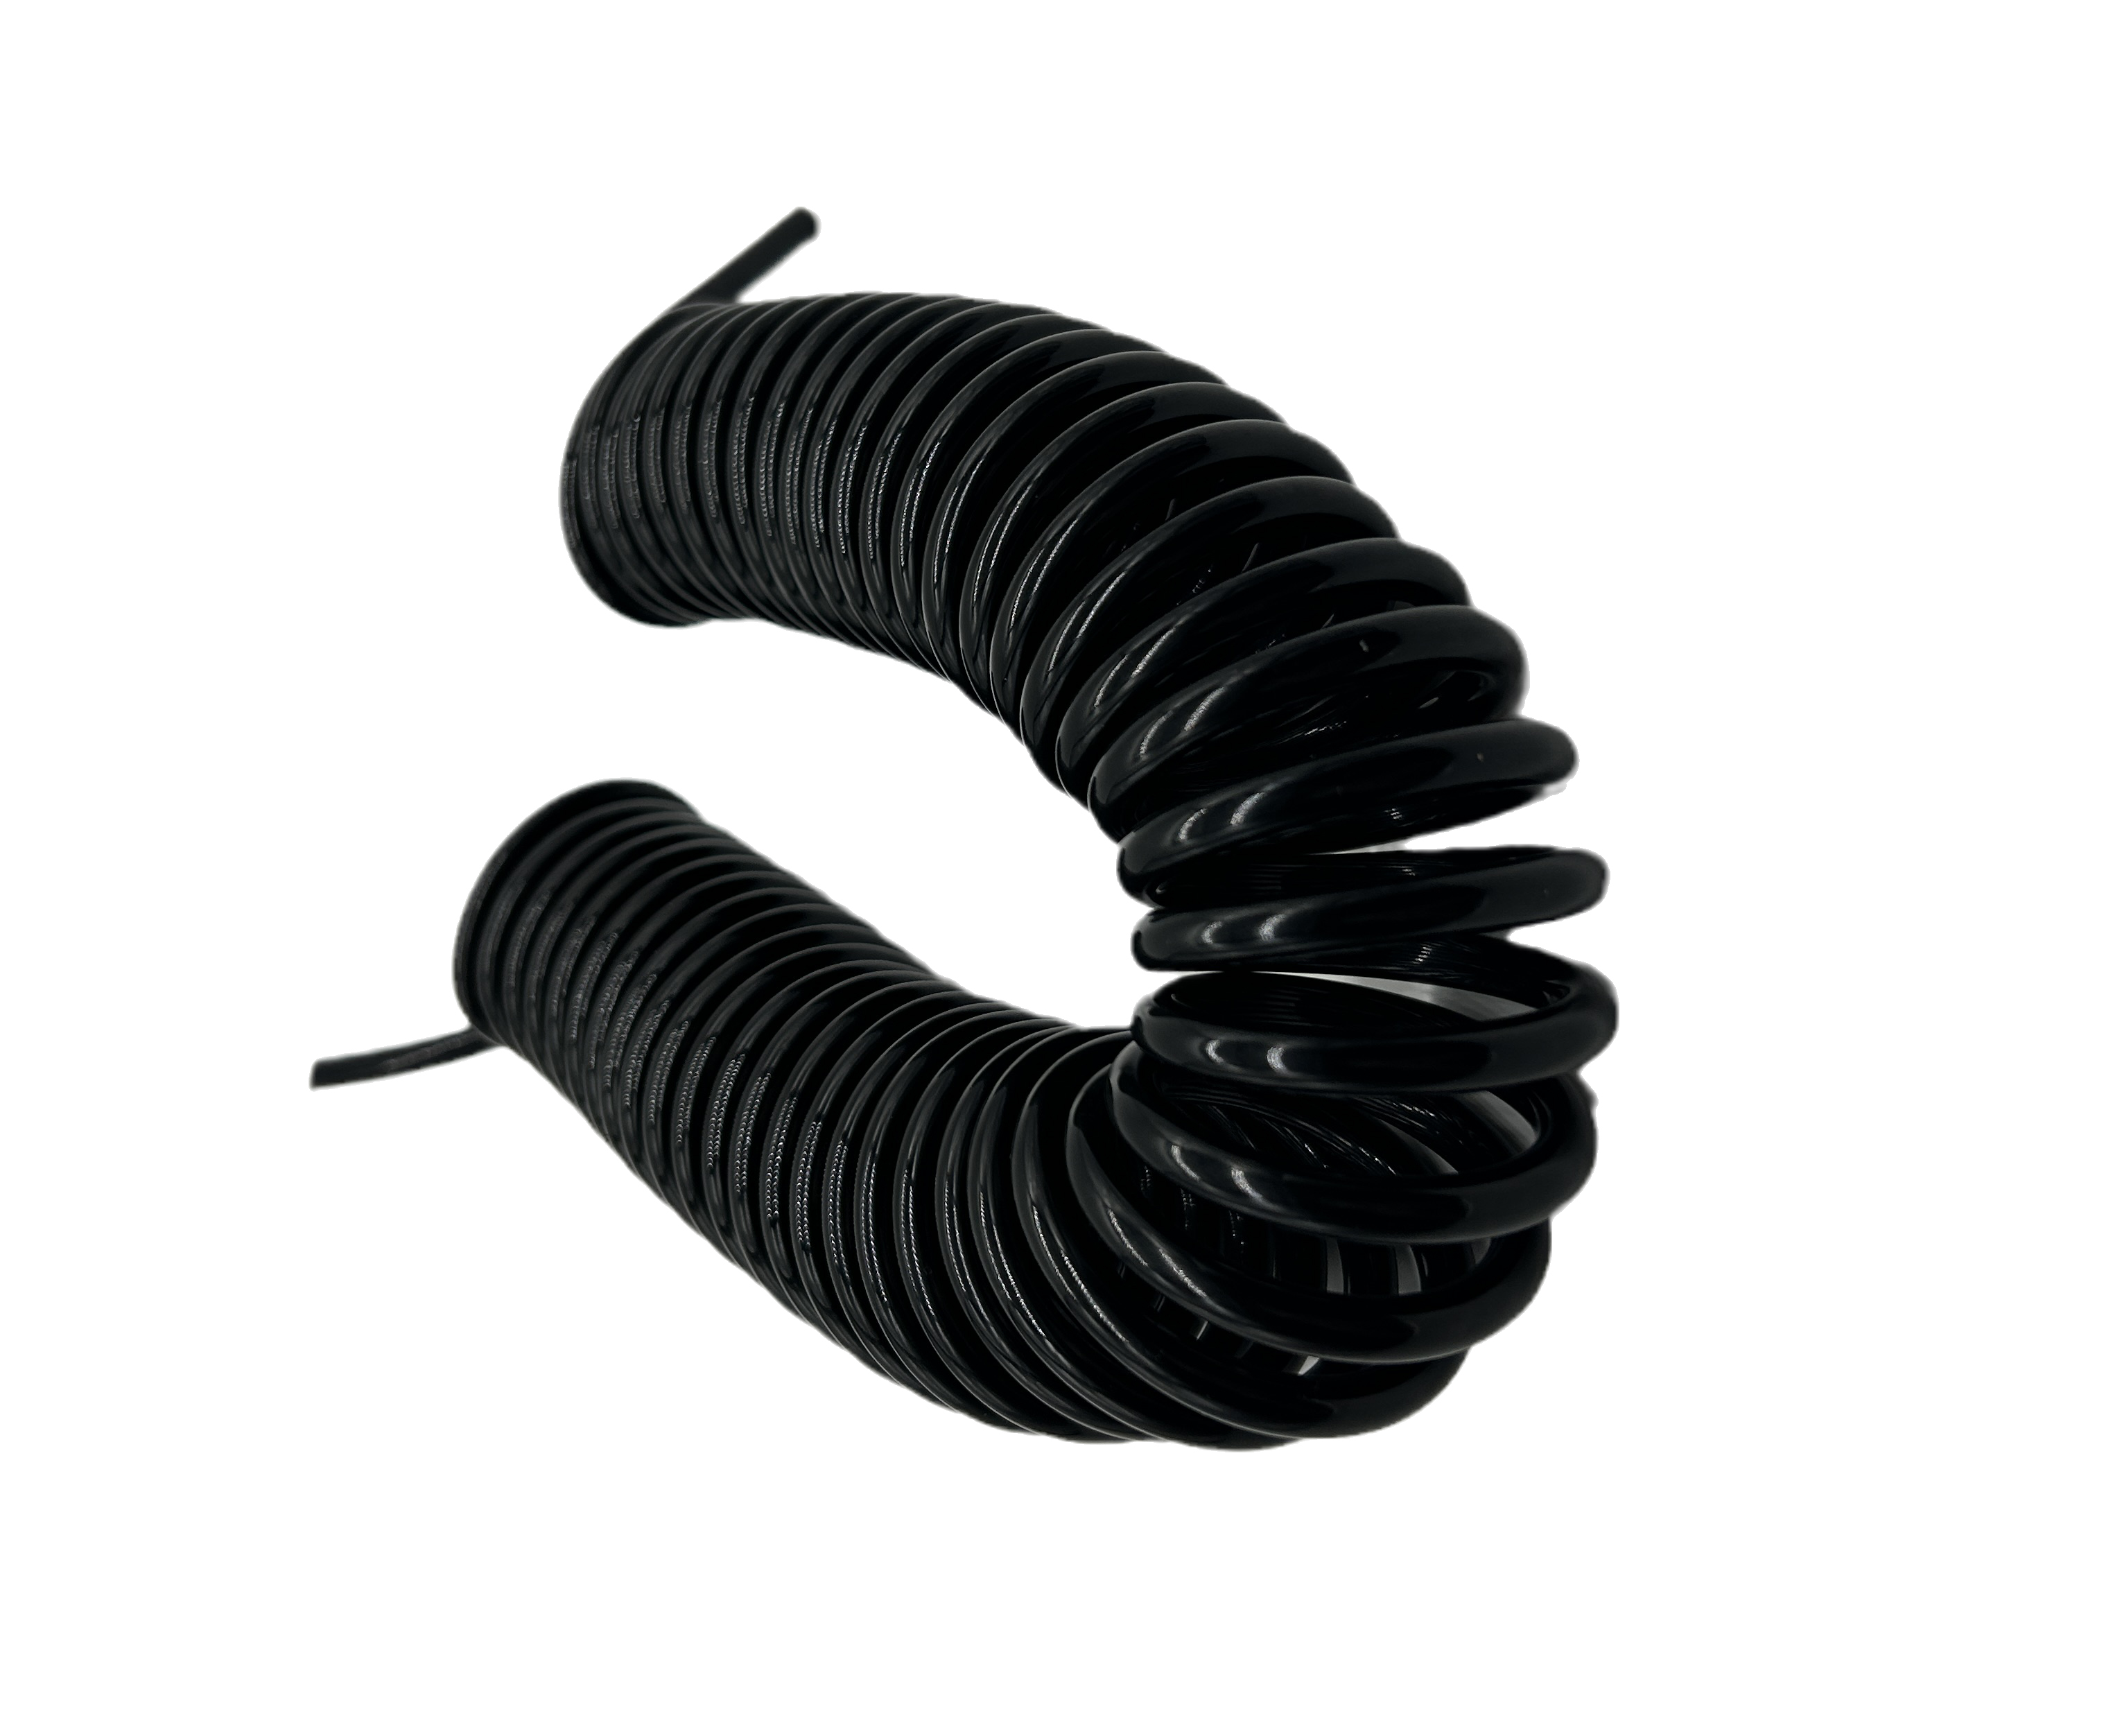 Pu tube black spring tube with an outer diameter of 6mm-6 meters and no joints